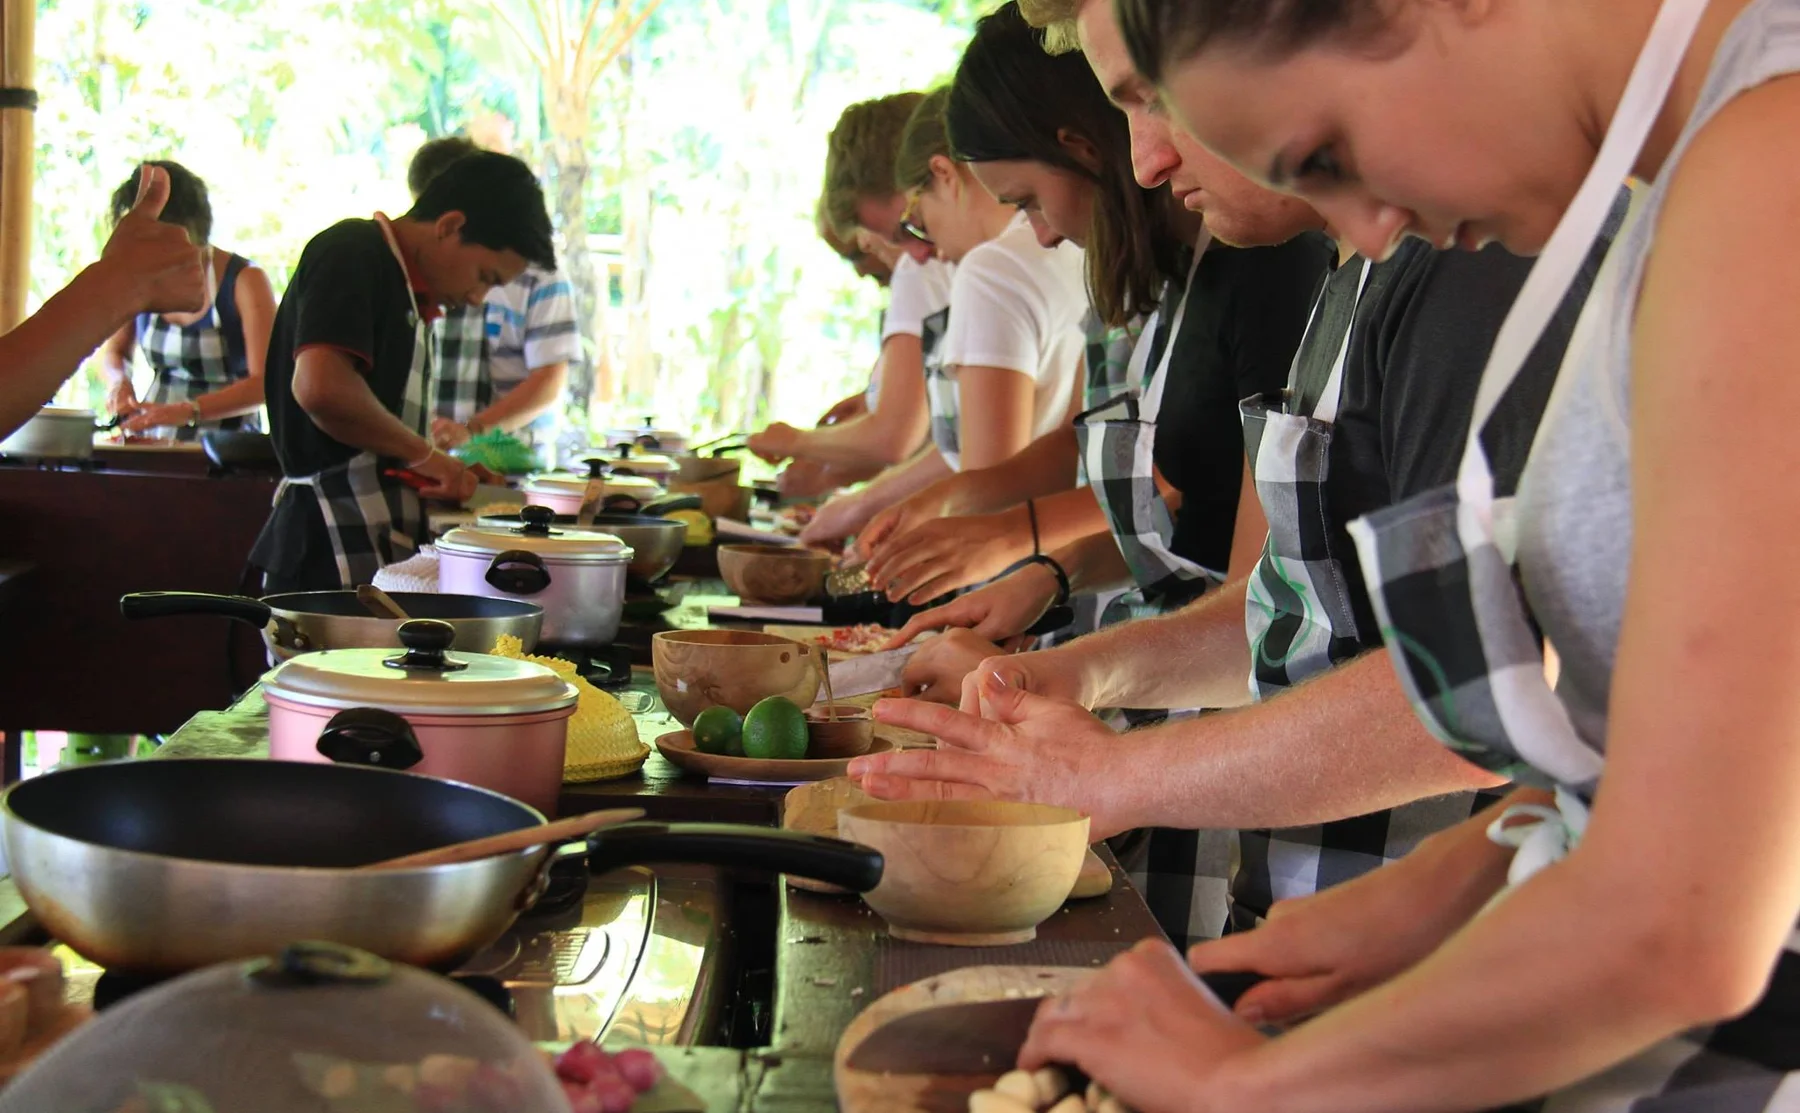 Cook Balinese food right in the middle of the organic farm - 1381592